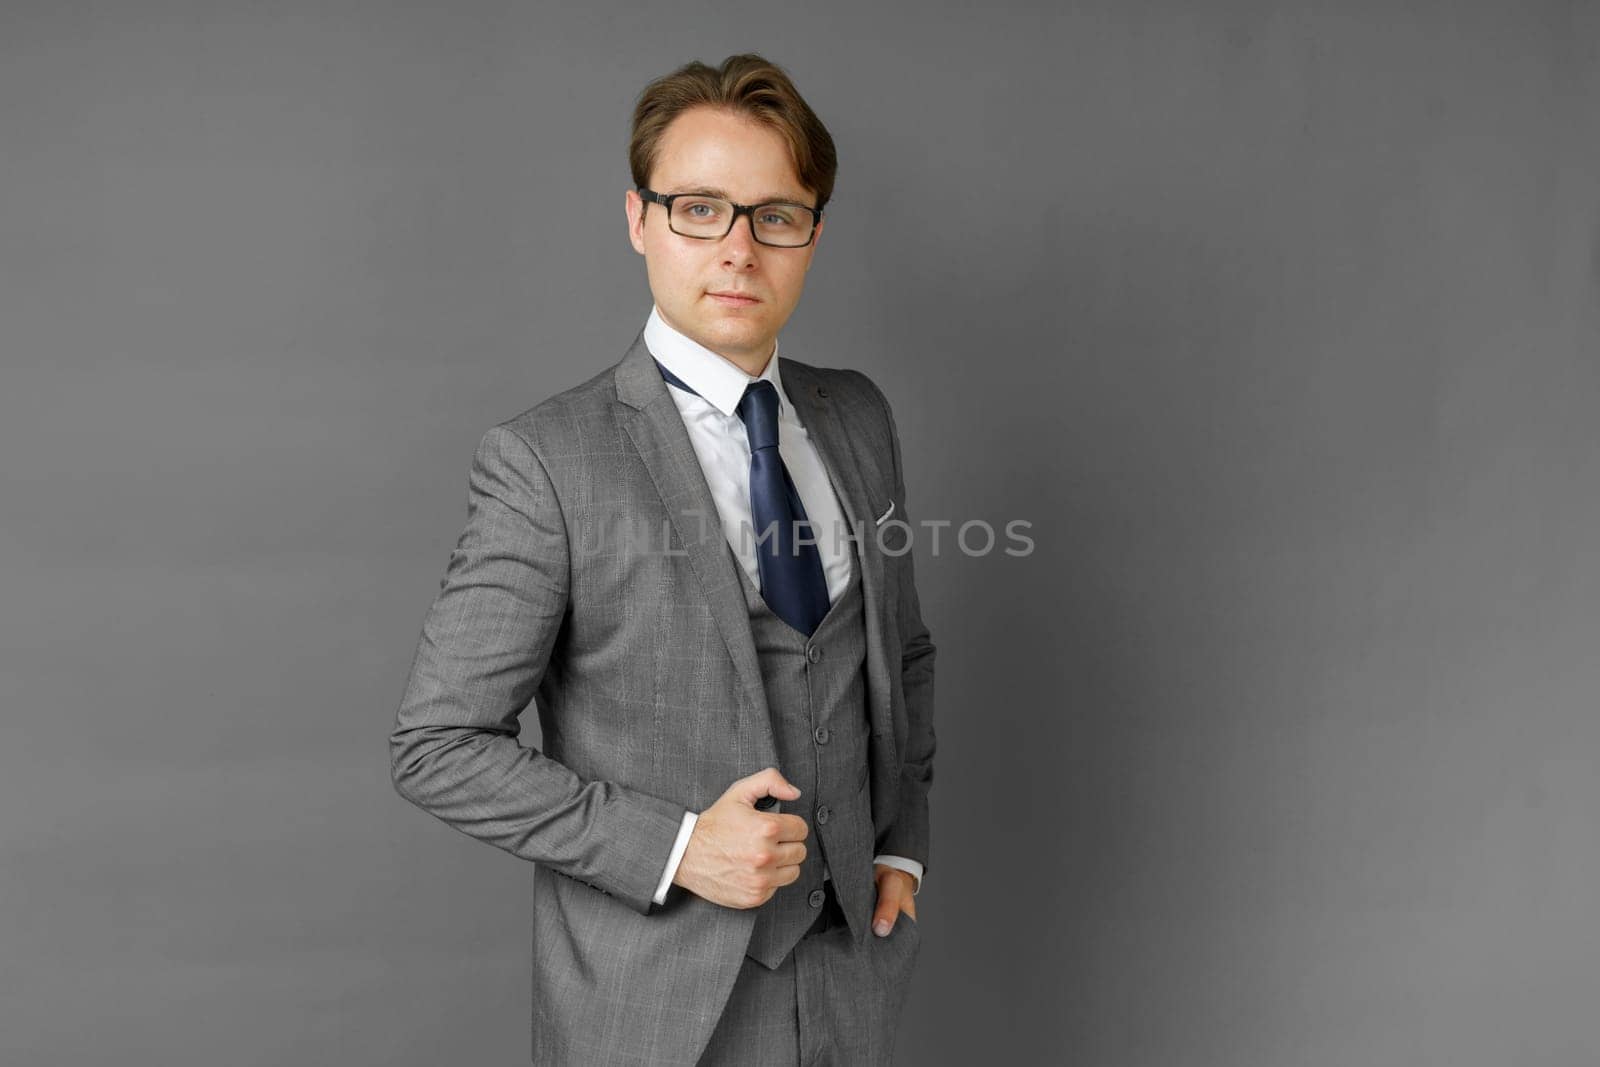 Portrait of a businessman in a suit looking at the camera. Gray background. Business and finance concept